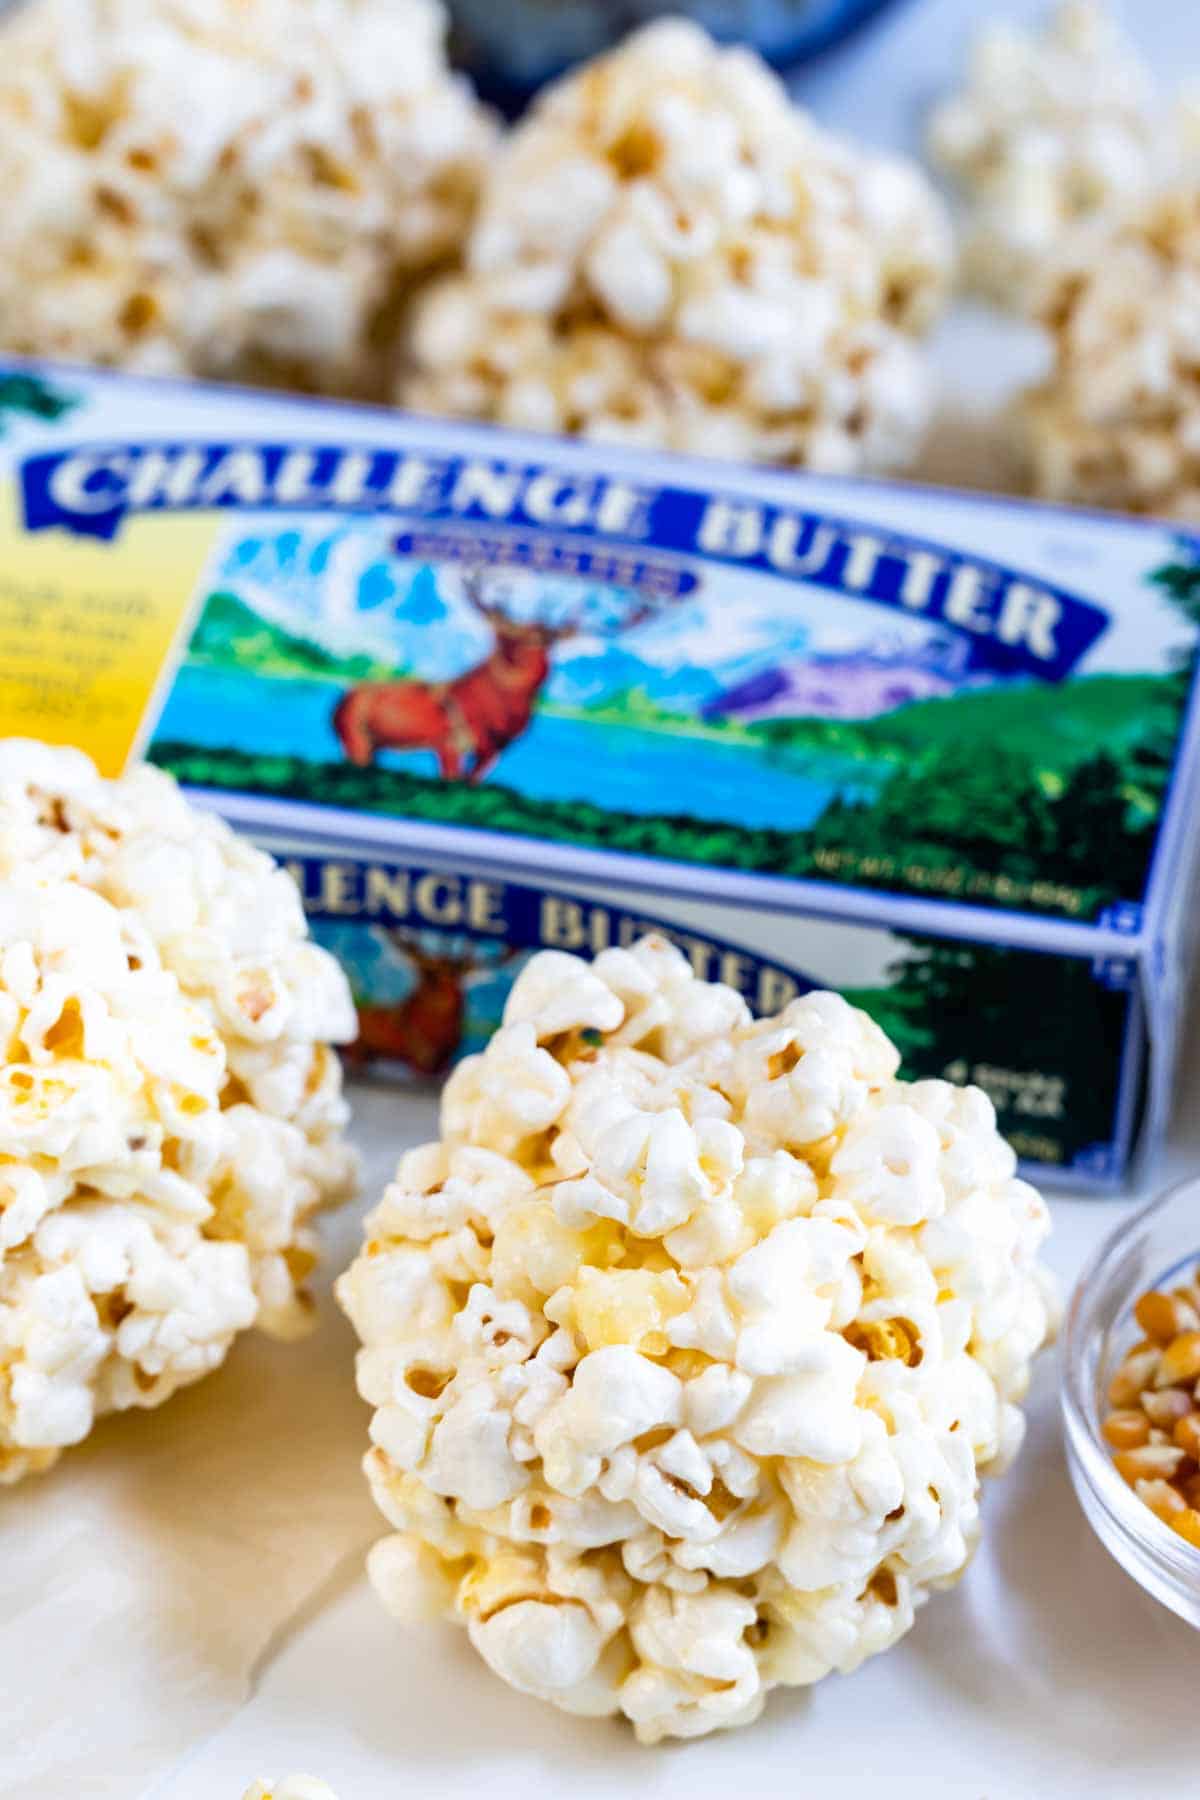 popcorn balls with challenge butter package